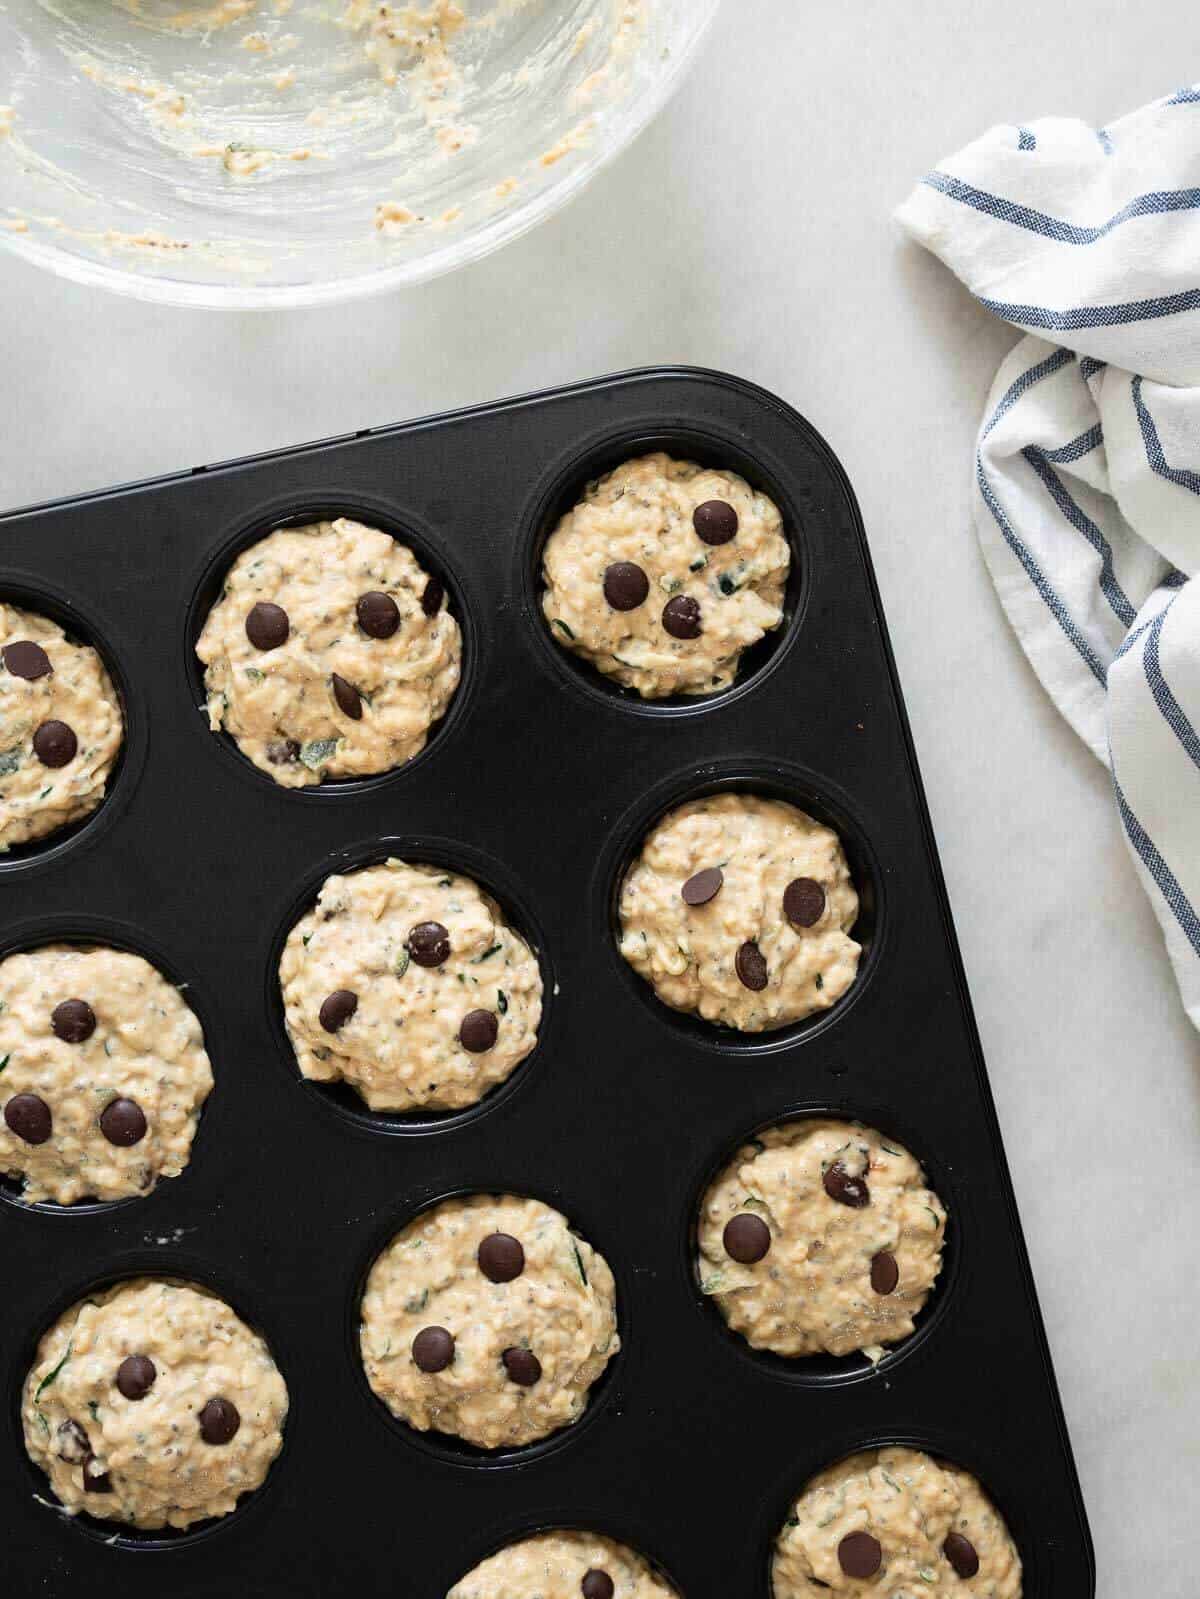 add extra chocolate chips on top of the unbaked muffins.